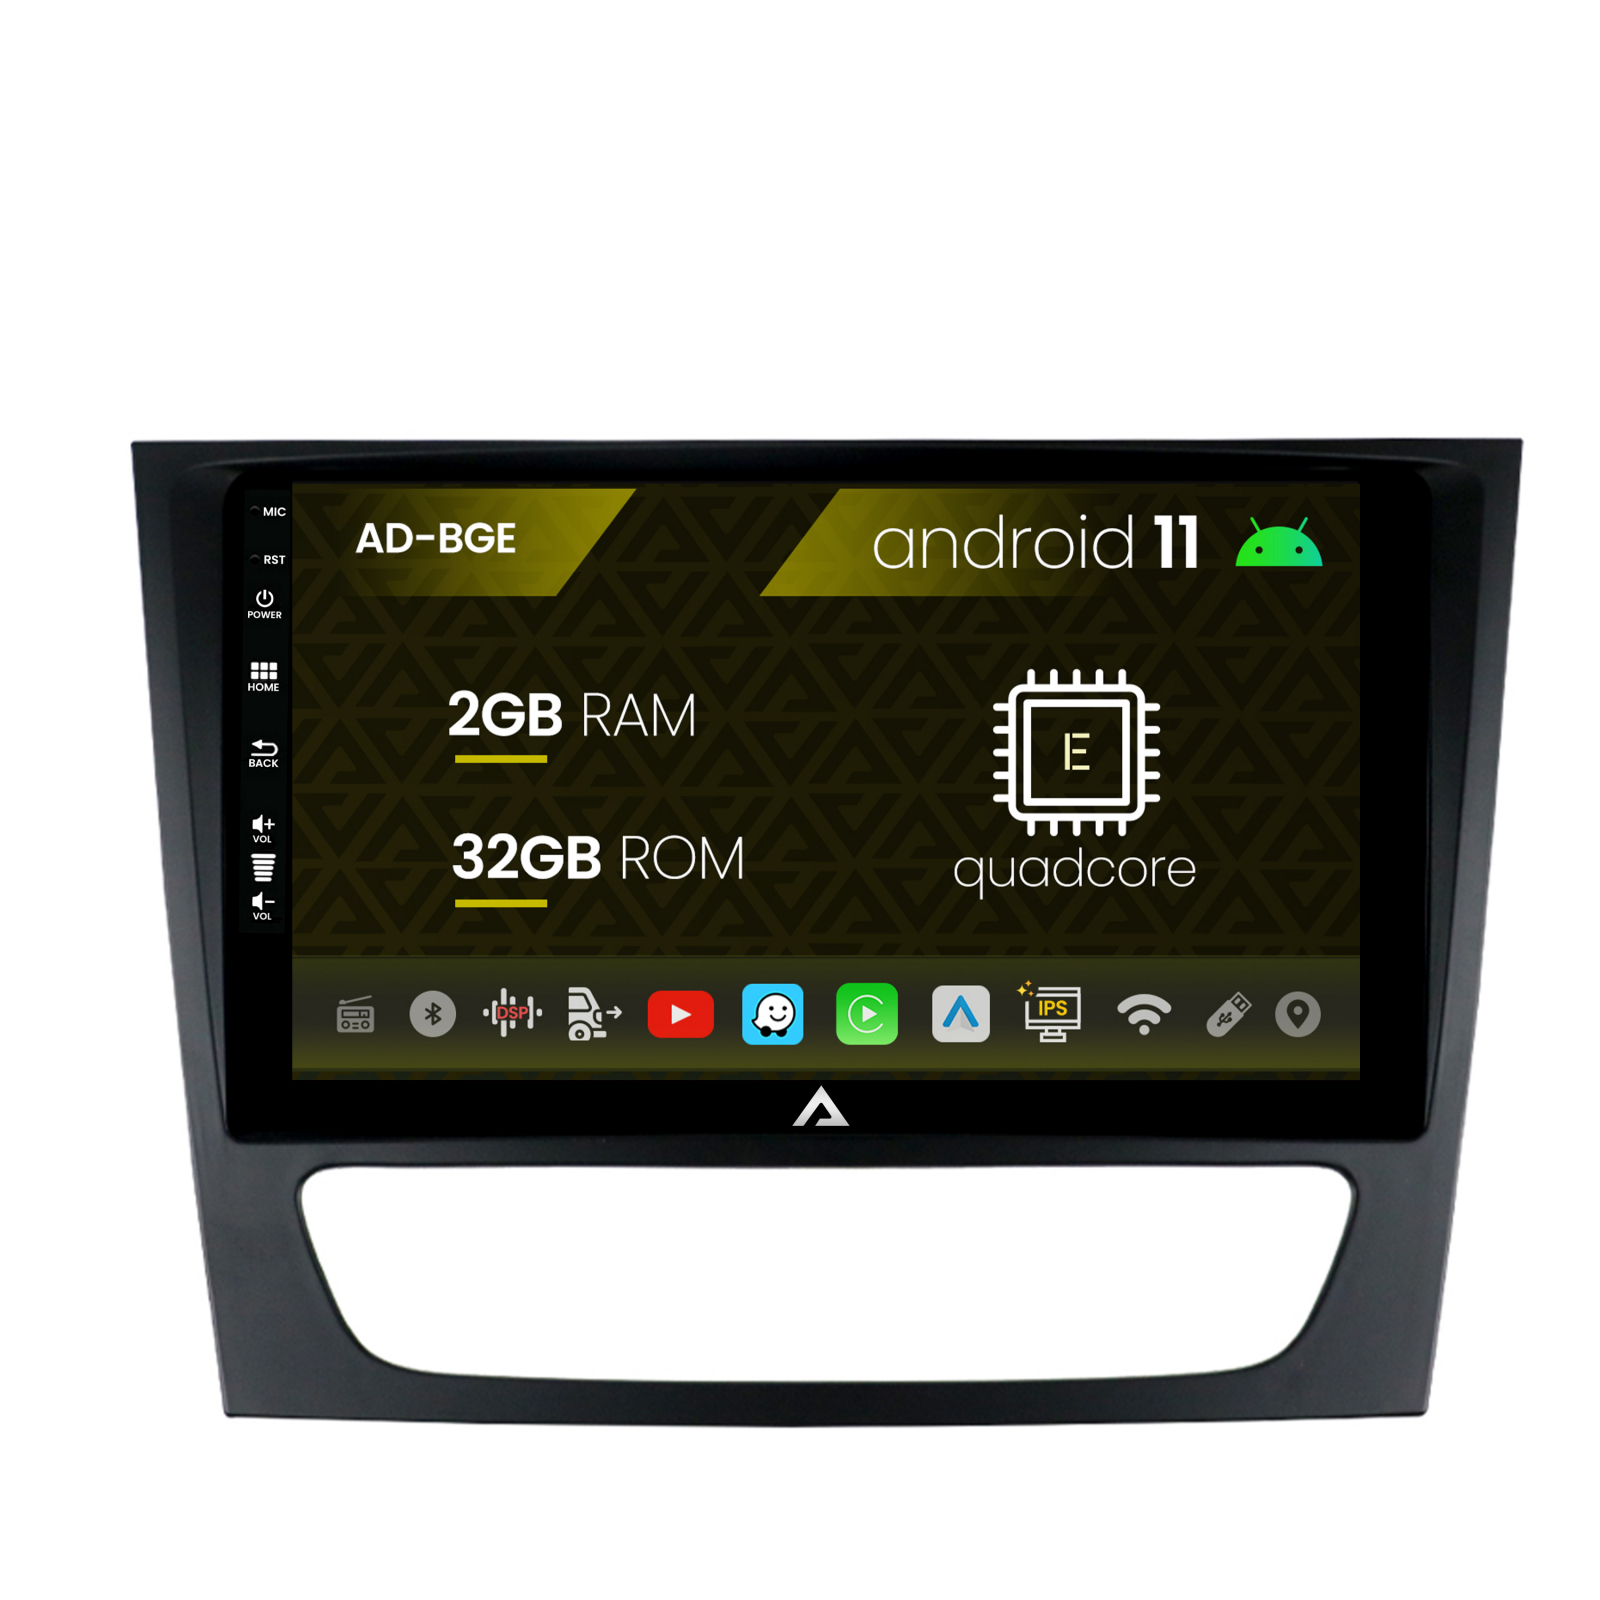 Navigatie Mercedes Benz W211/CLS, Android 11, E-Quadcore / 2GB RAM + 32GB ROM, 9 Inch - AD-BGE9002+AD-BGRKIT415